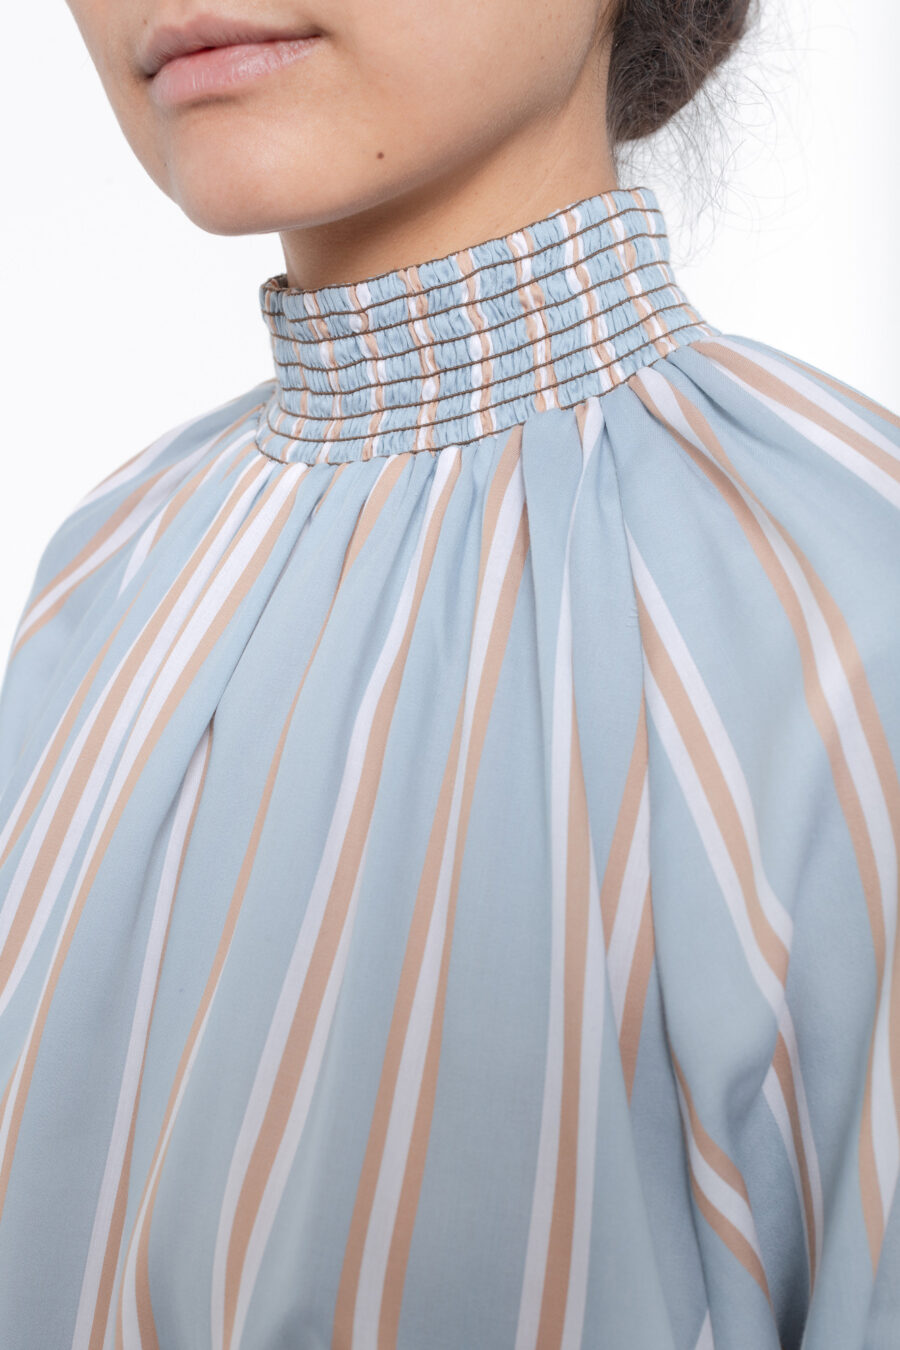 Top with gathered stand up collar in a striped light blue and brown cotton popline